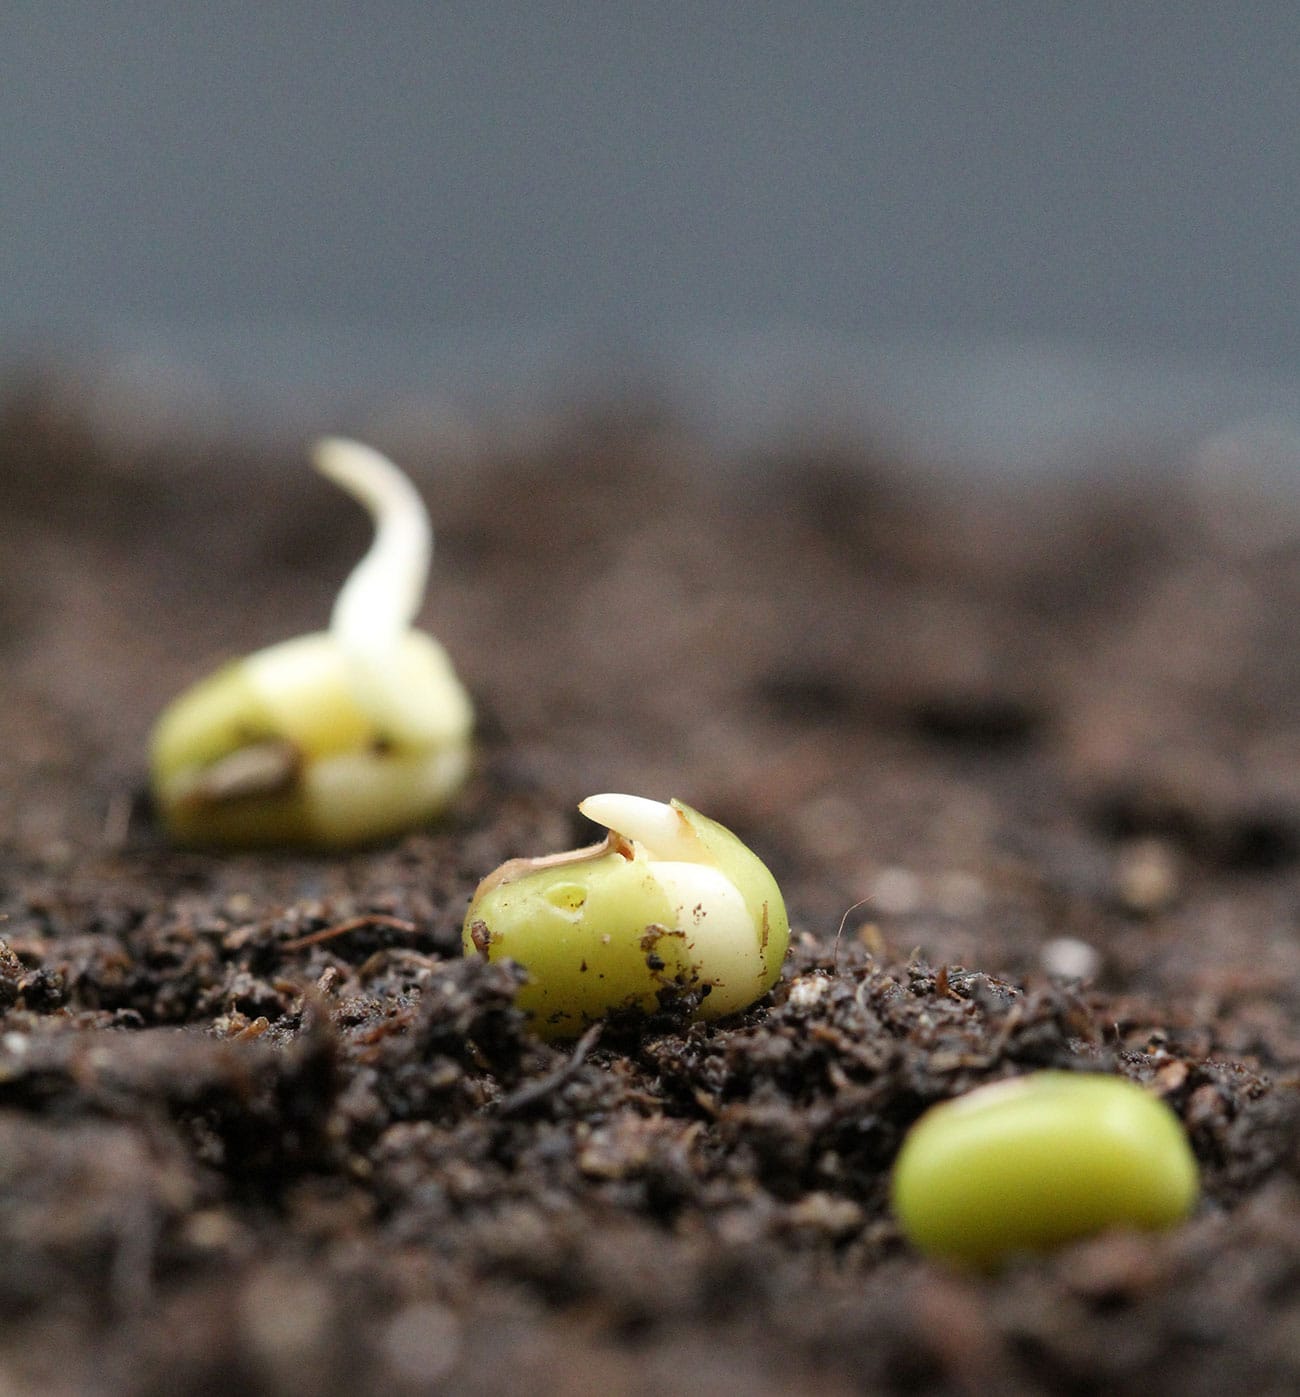 Shedding light on the earliest events of seed germination